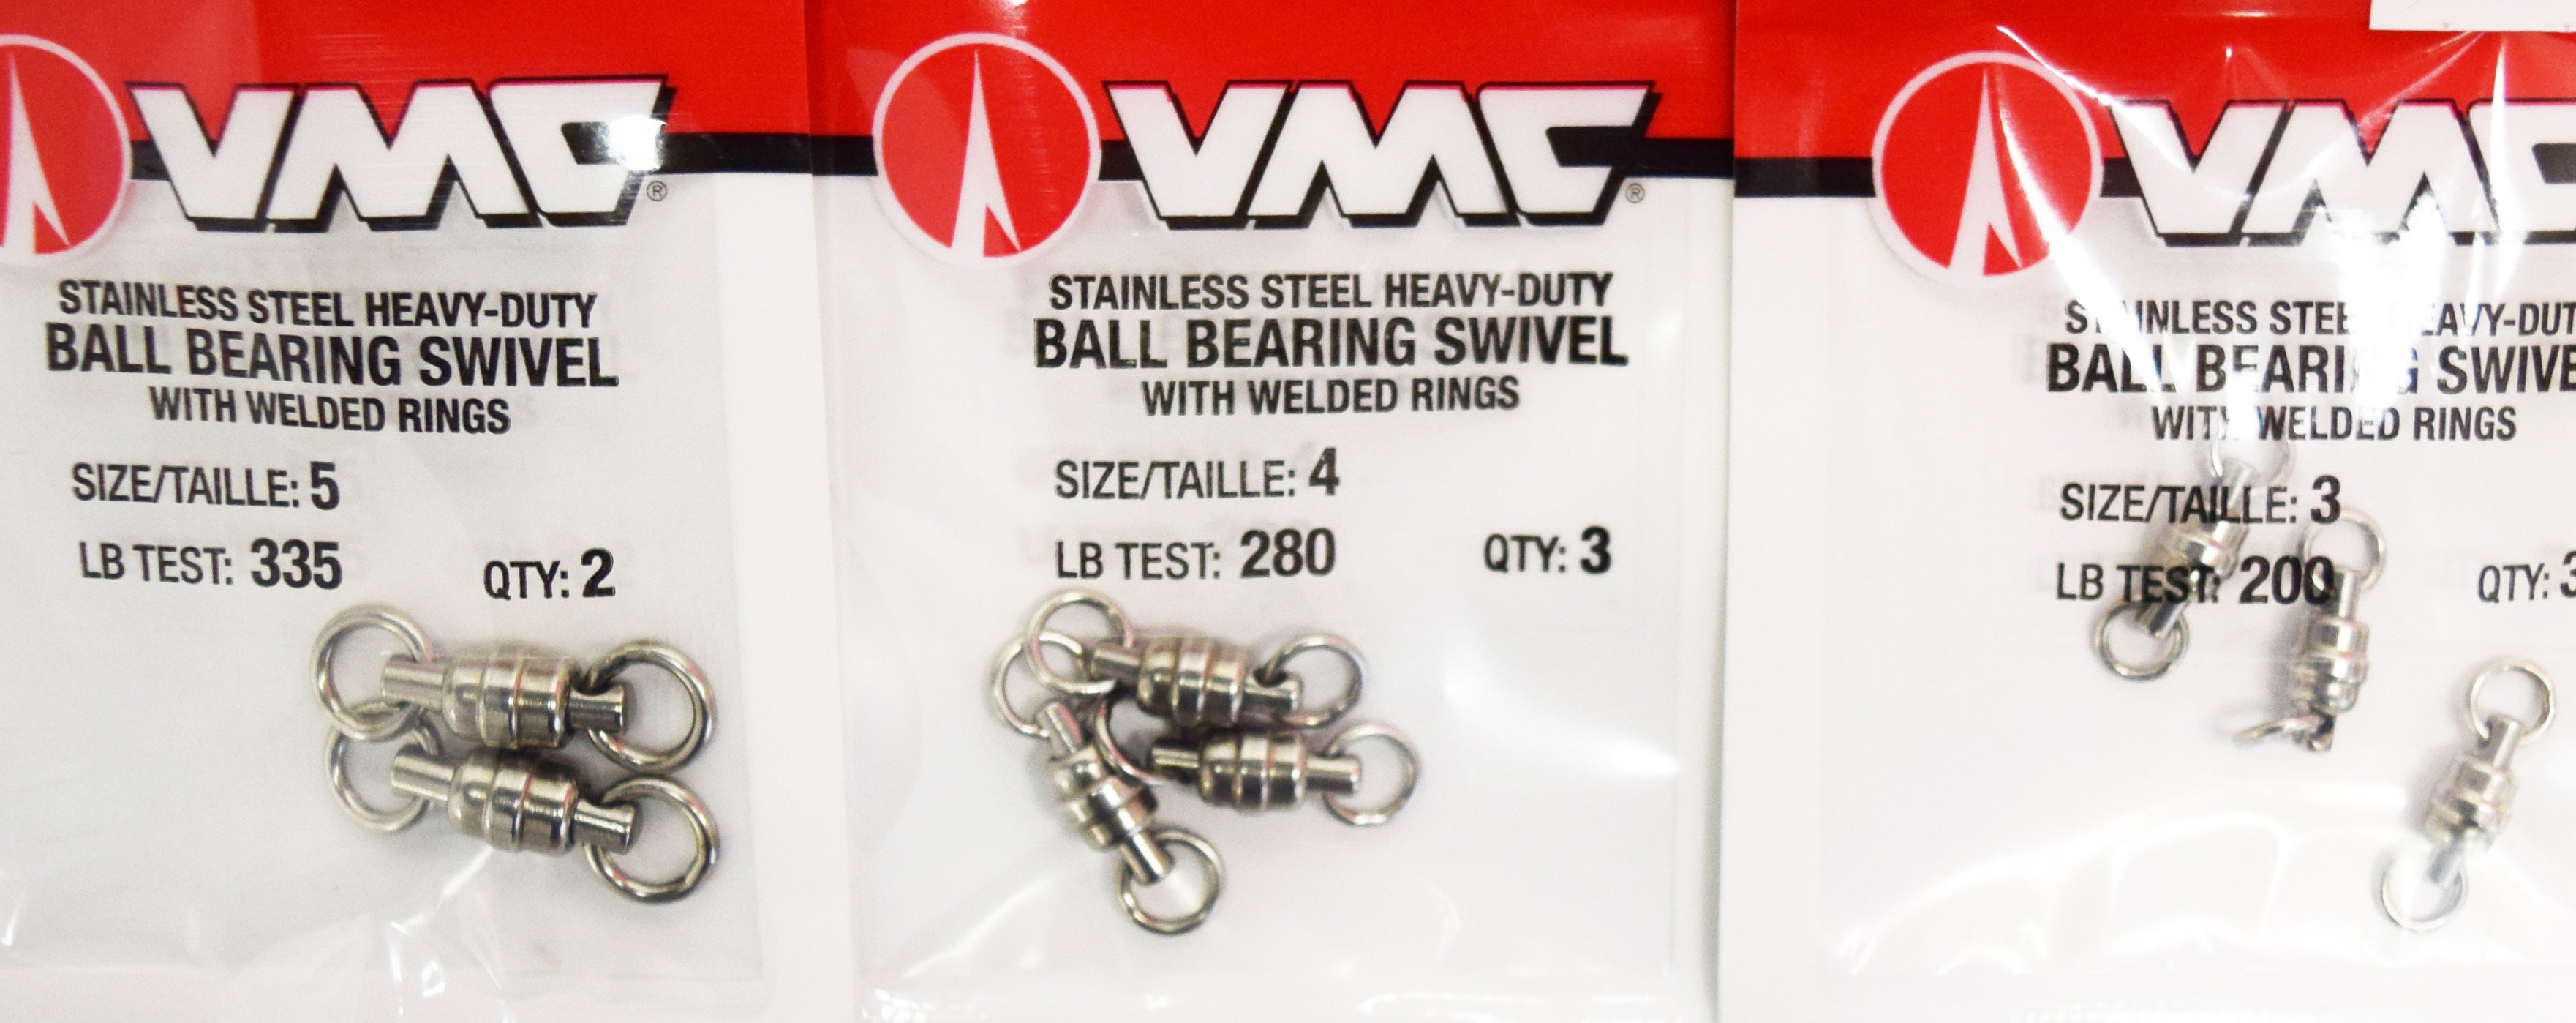 VMC Stainless Steel HD Ball Bearing Swivel with Welded Rings - Buy